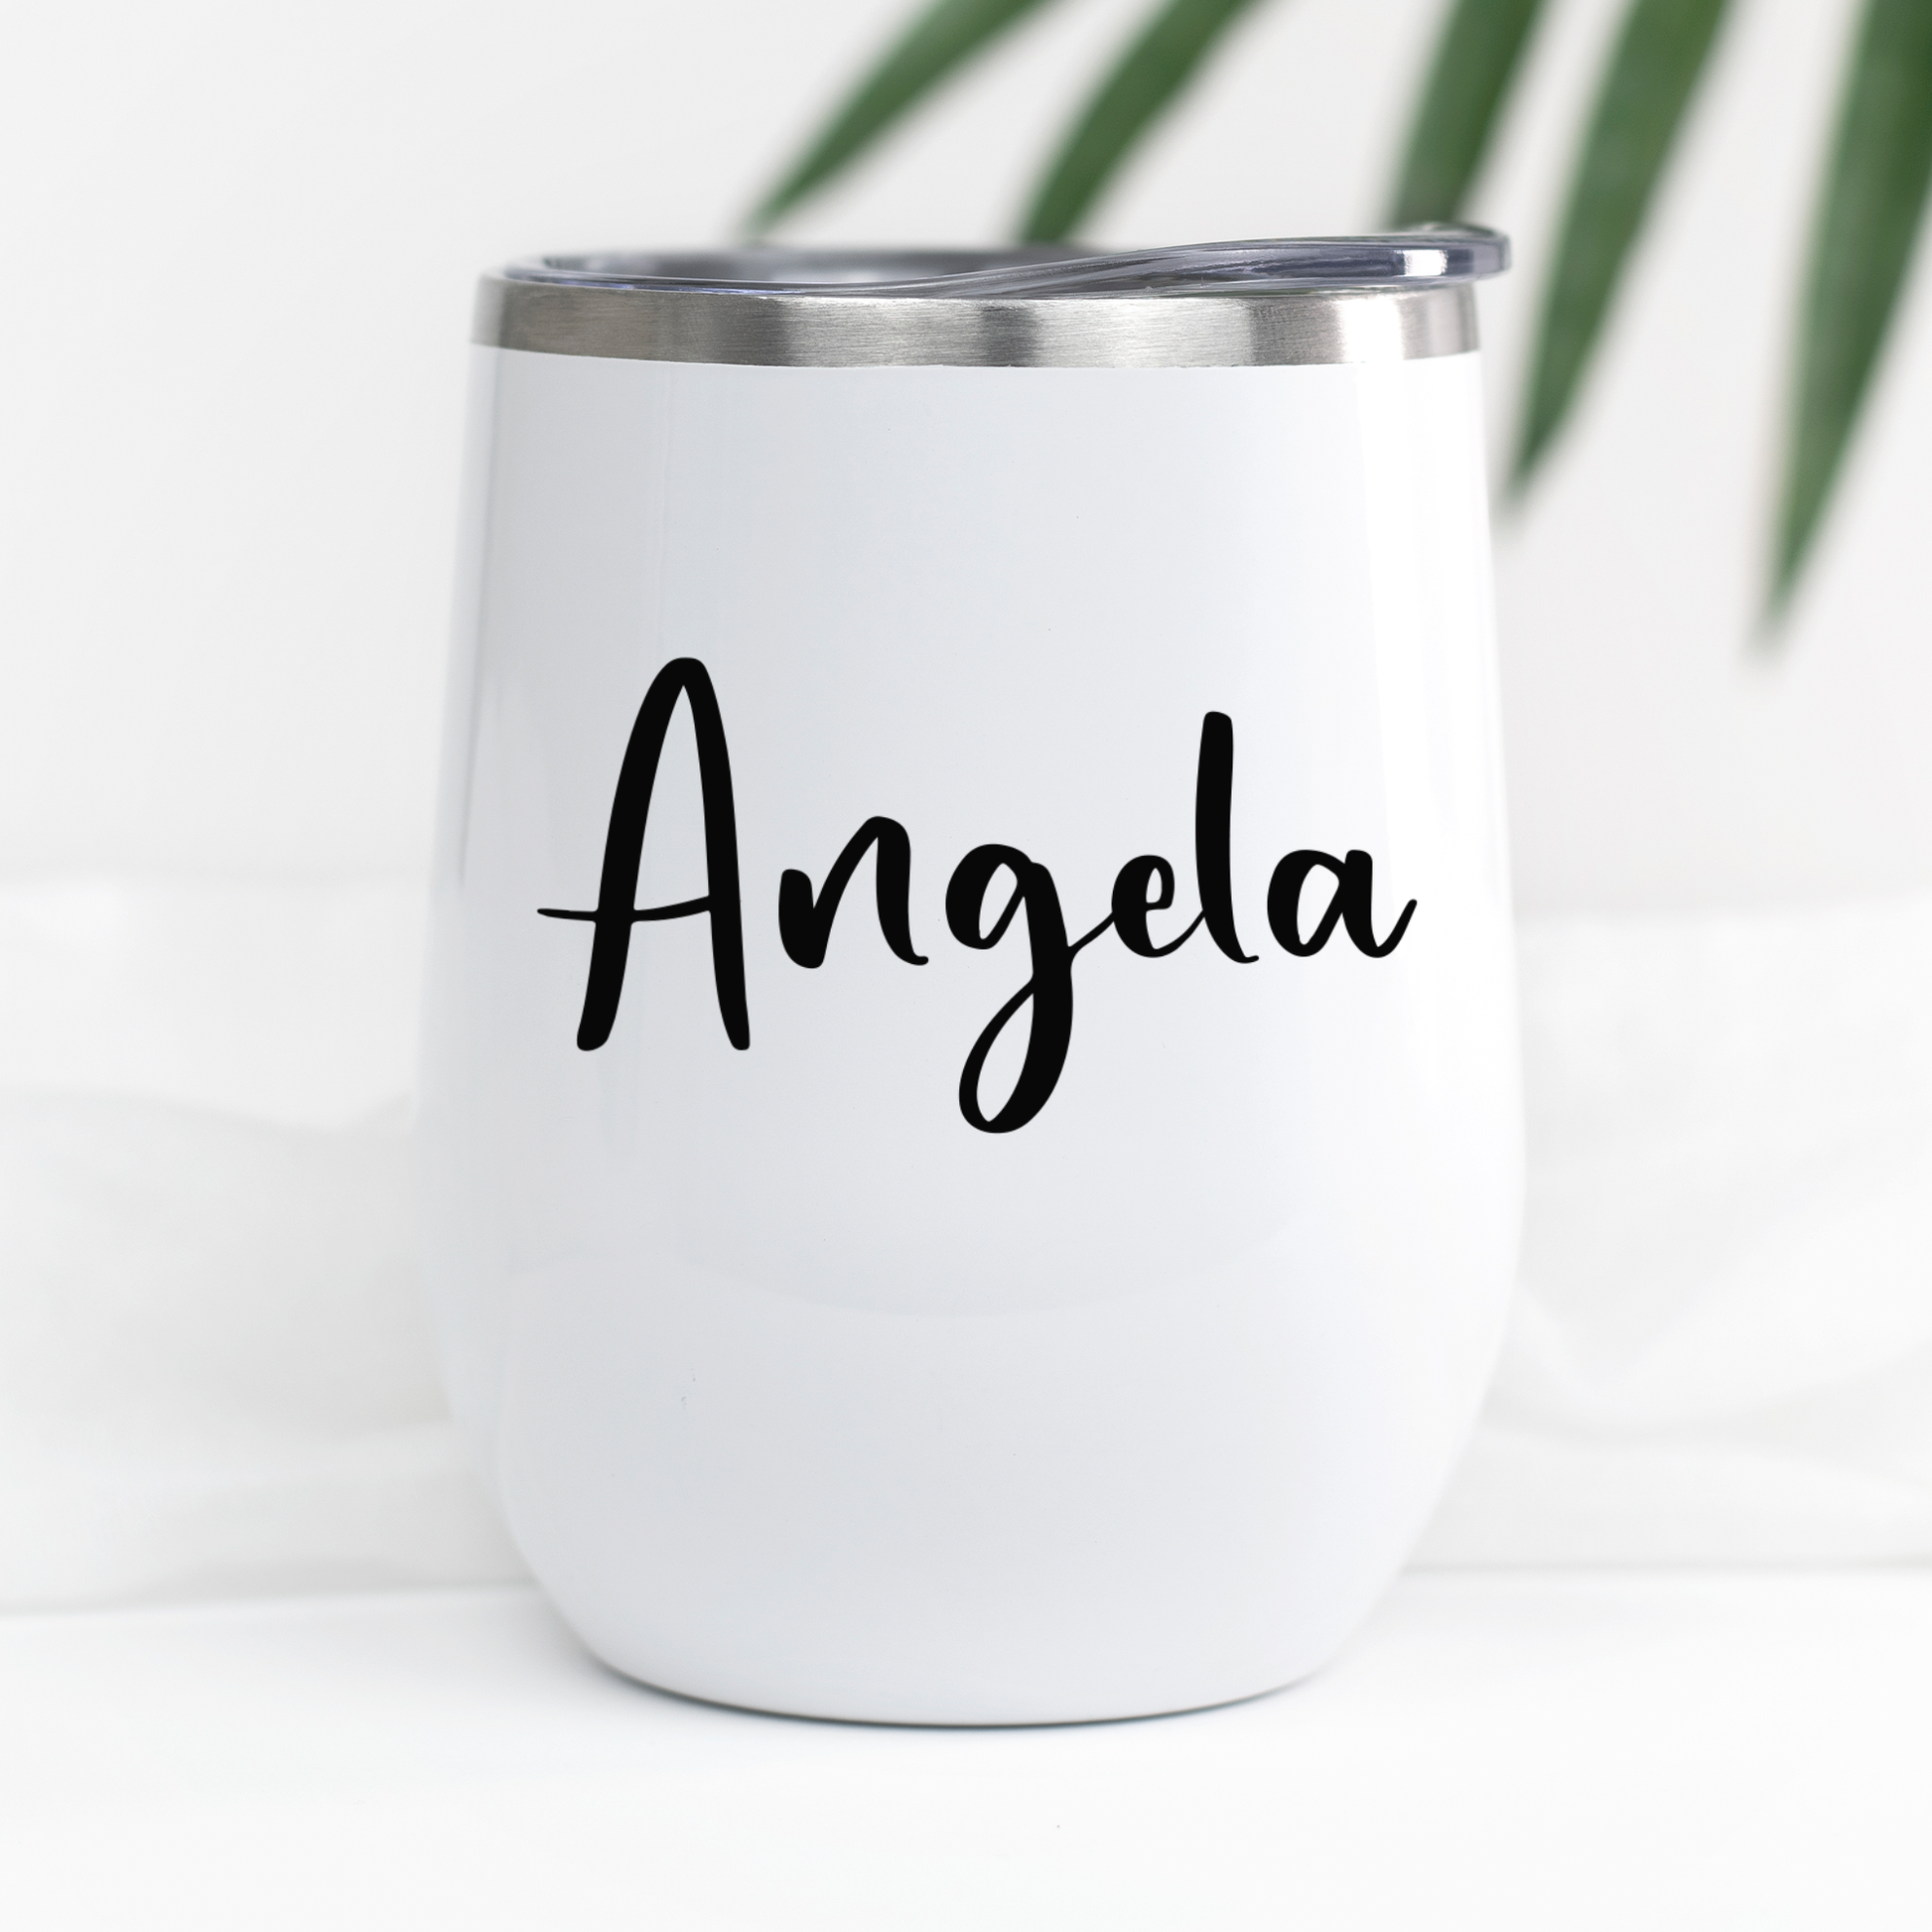 Best Sister-in-Law Wine Tumbler, Personalized Sister in Law Birthday, Christmas Gift, Sister Floral Cup, Sis in Law Wedding Gift from Bride